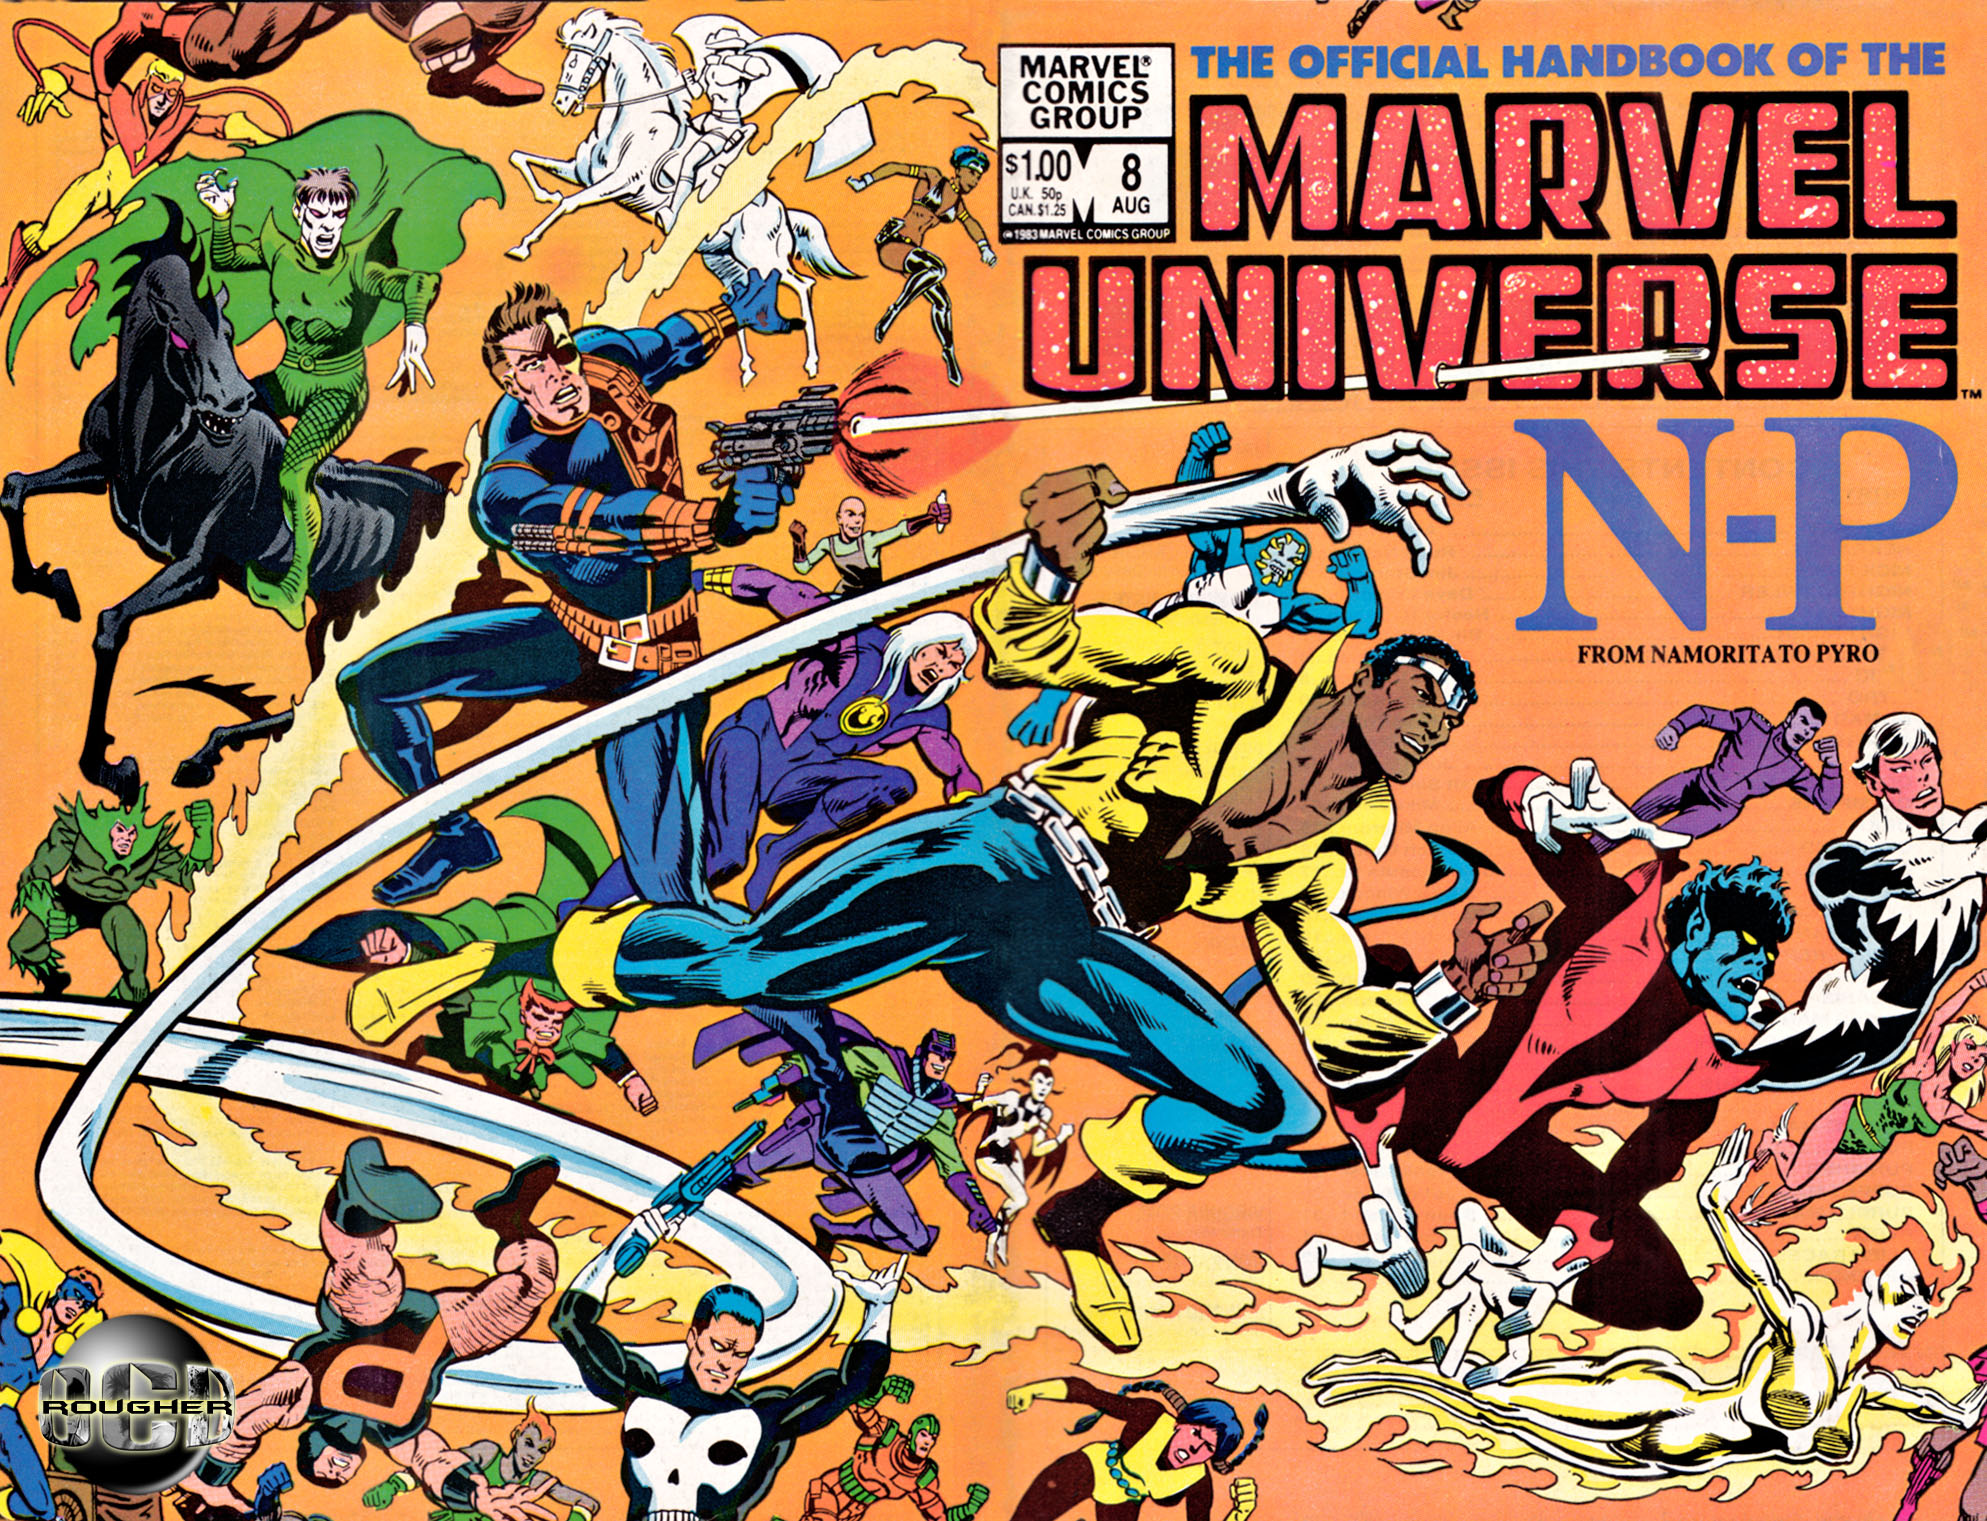 Read online The Official Handbook of the Marvel Universe comic -  Issue #8 - 1